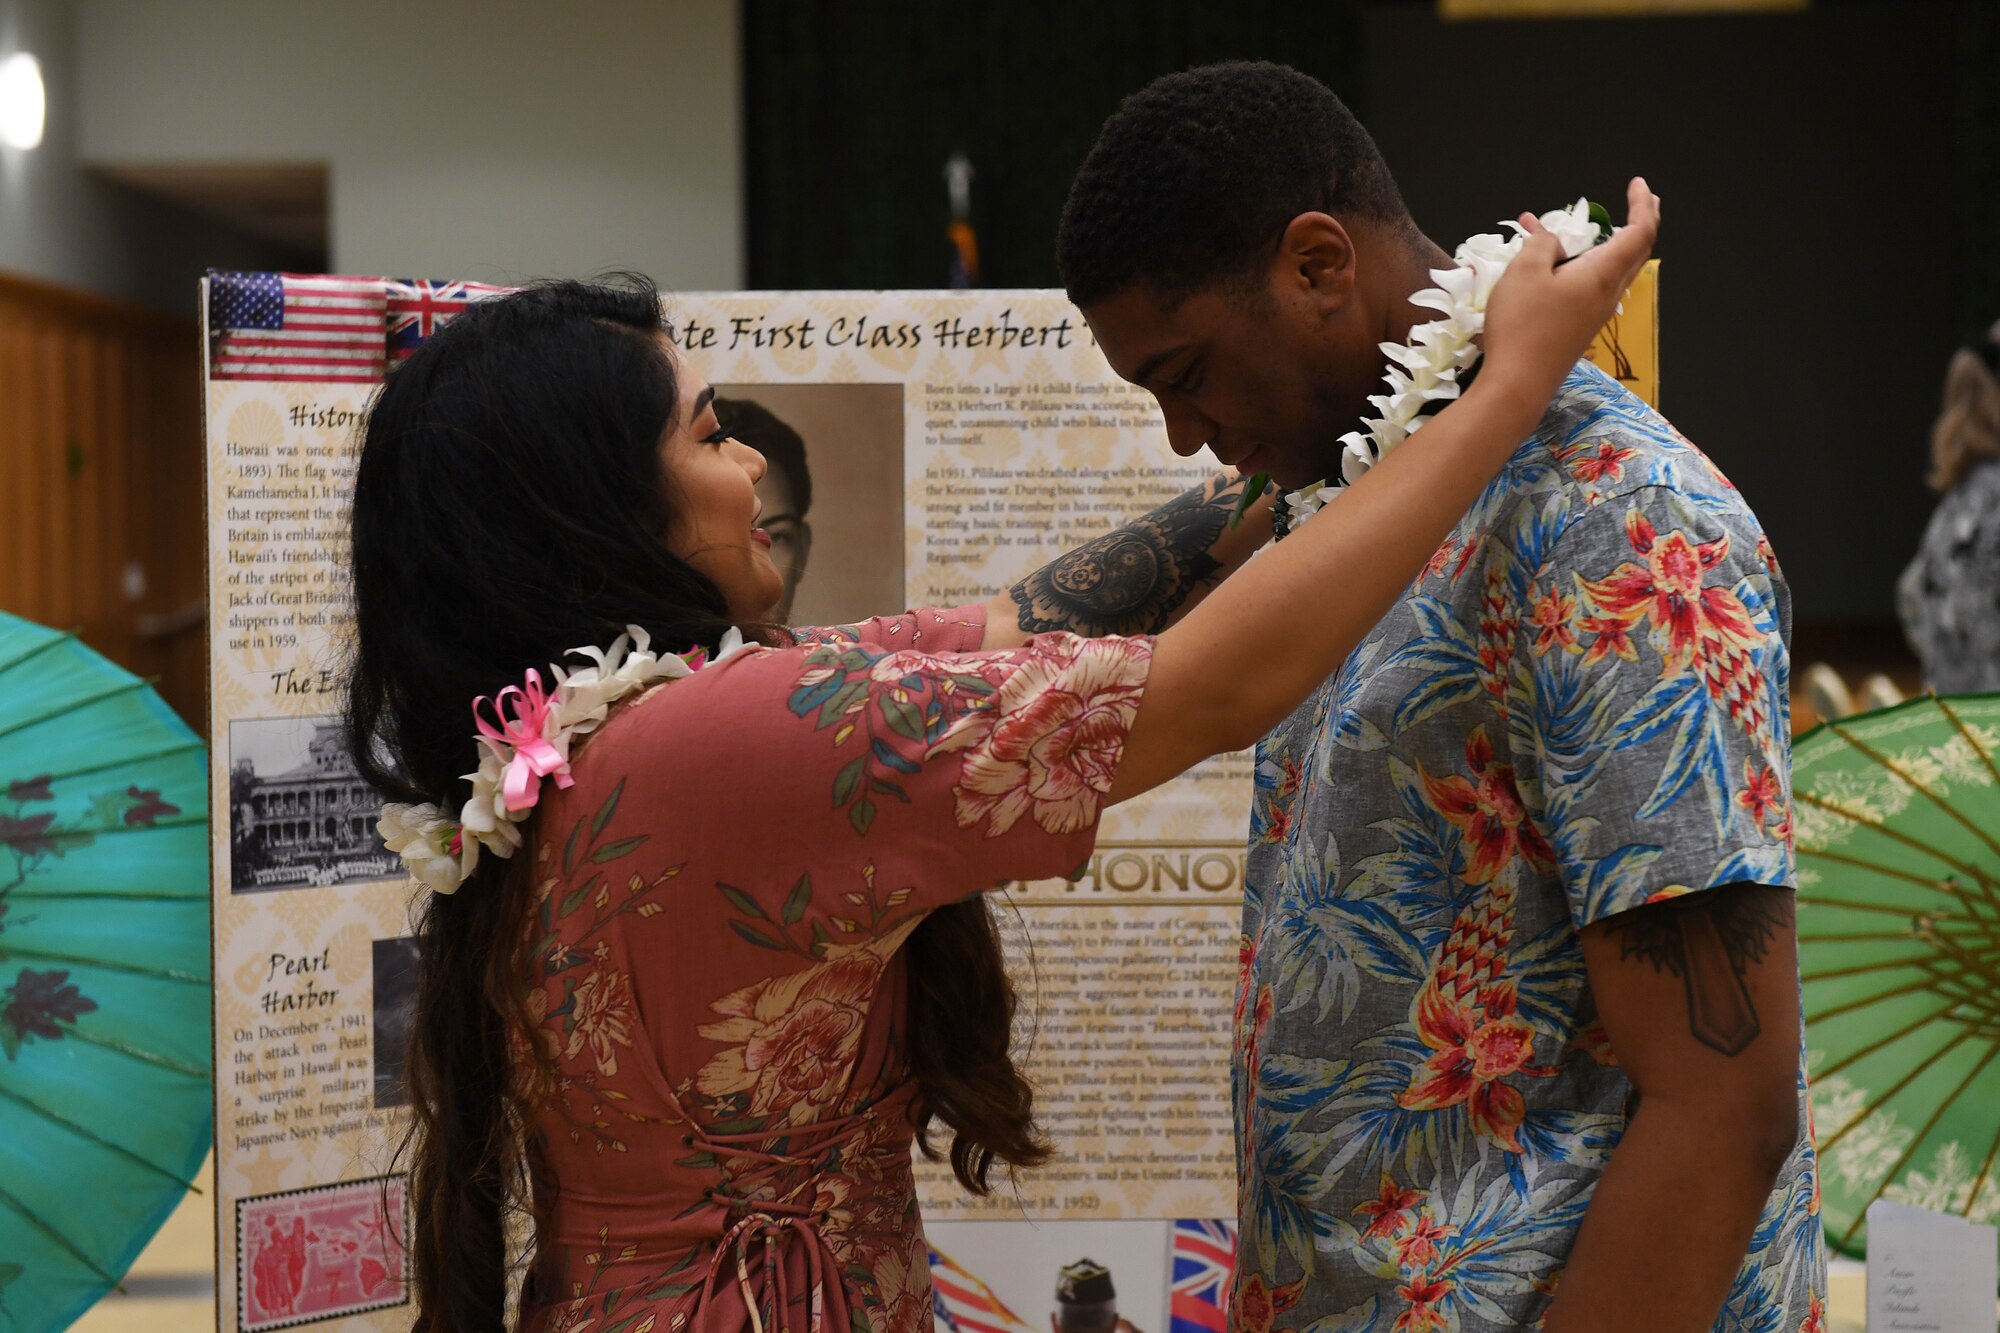 A woman places a lei on around a man's neck.